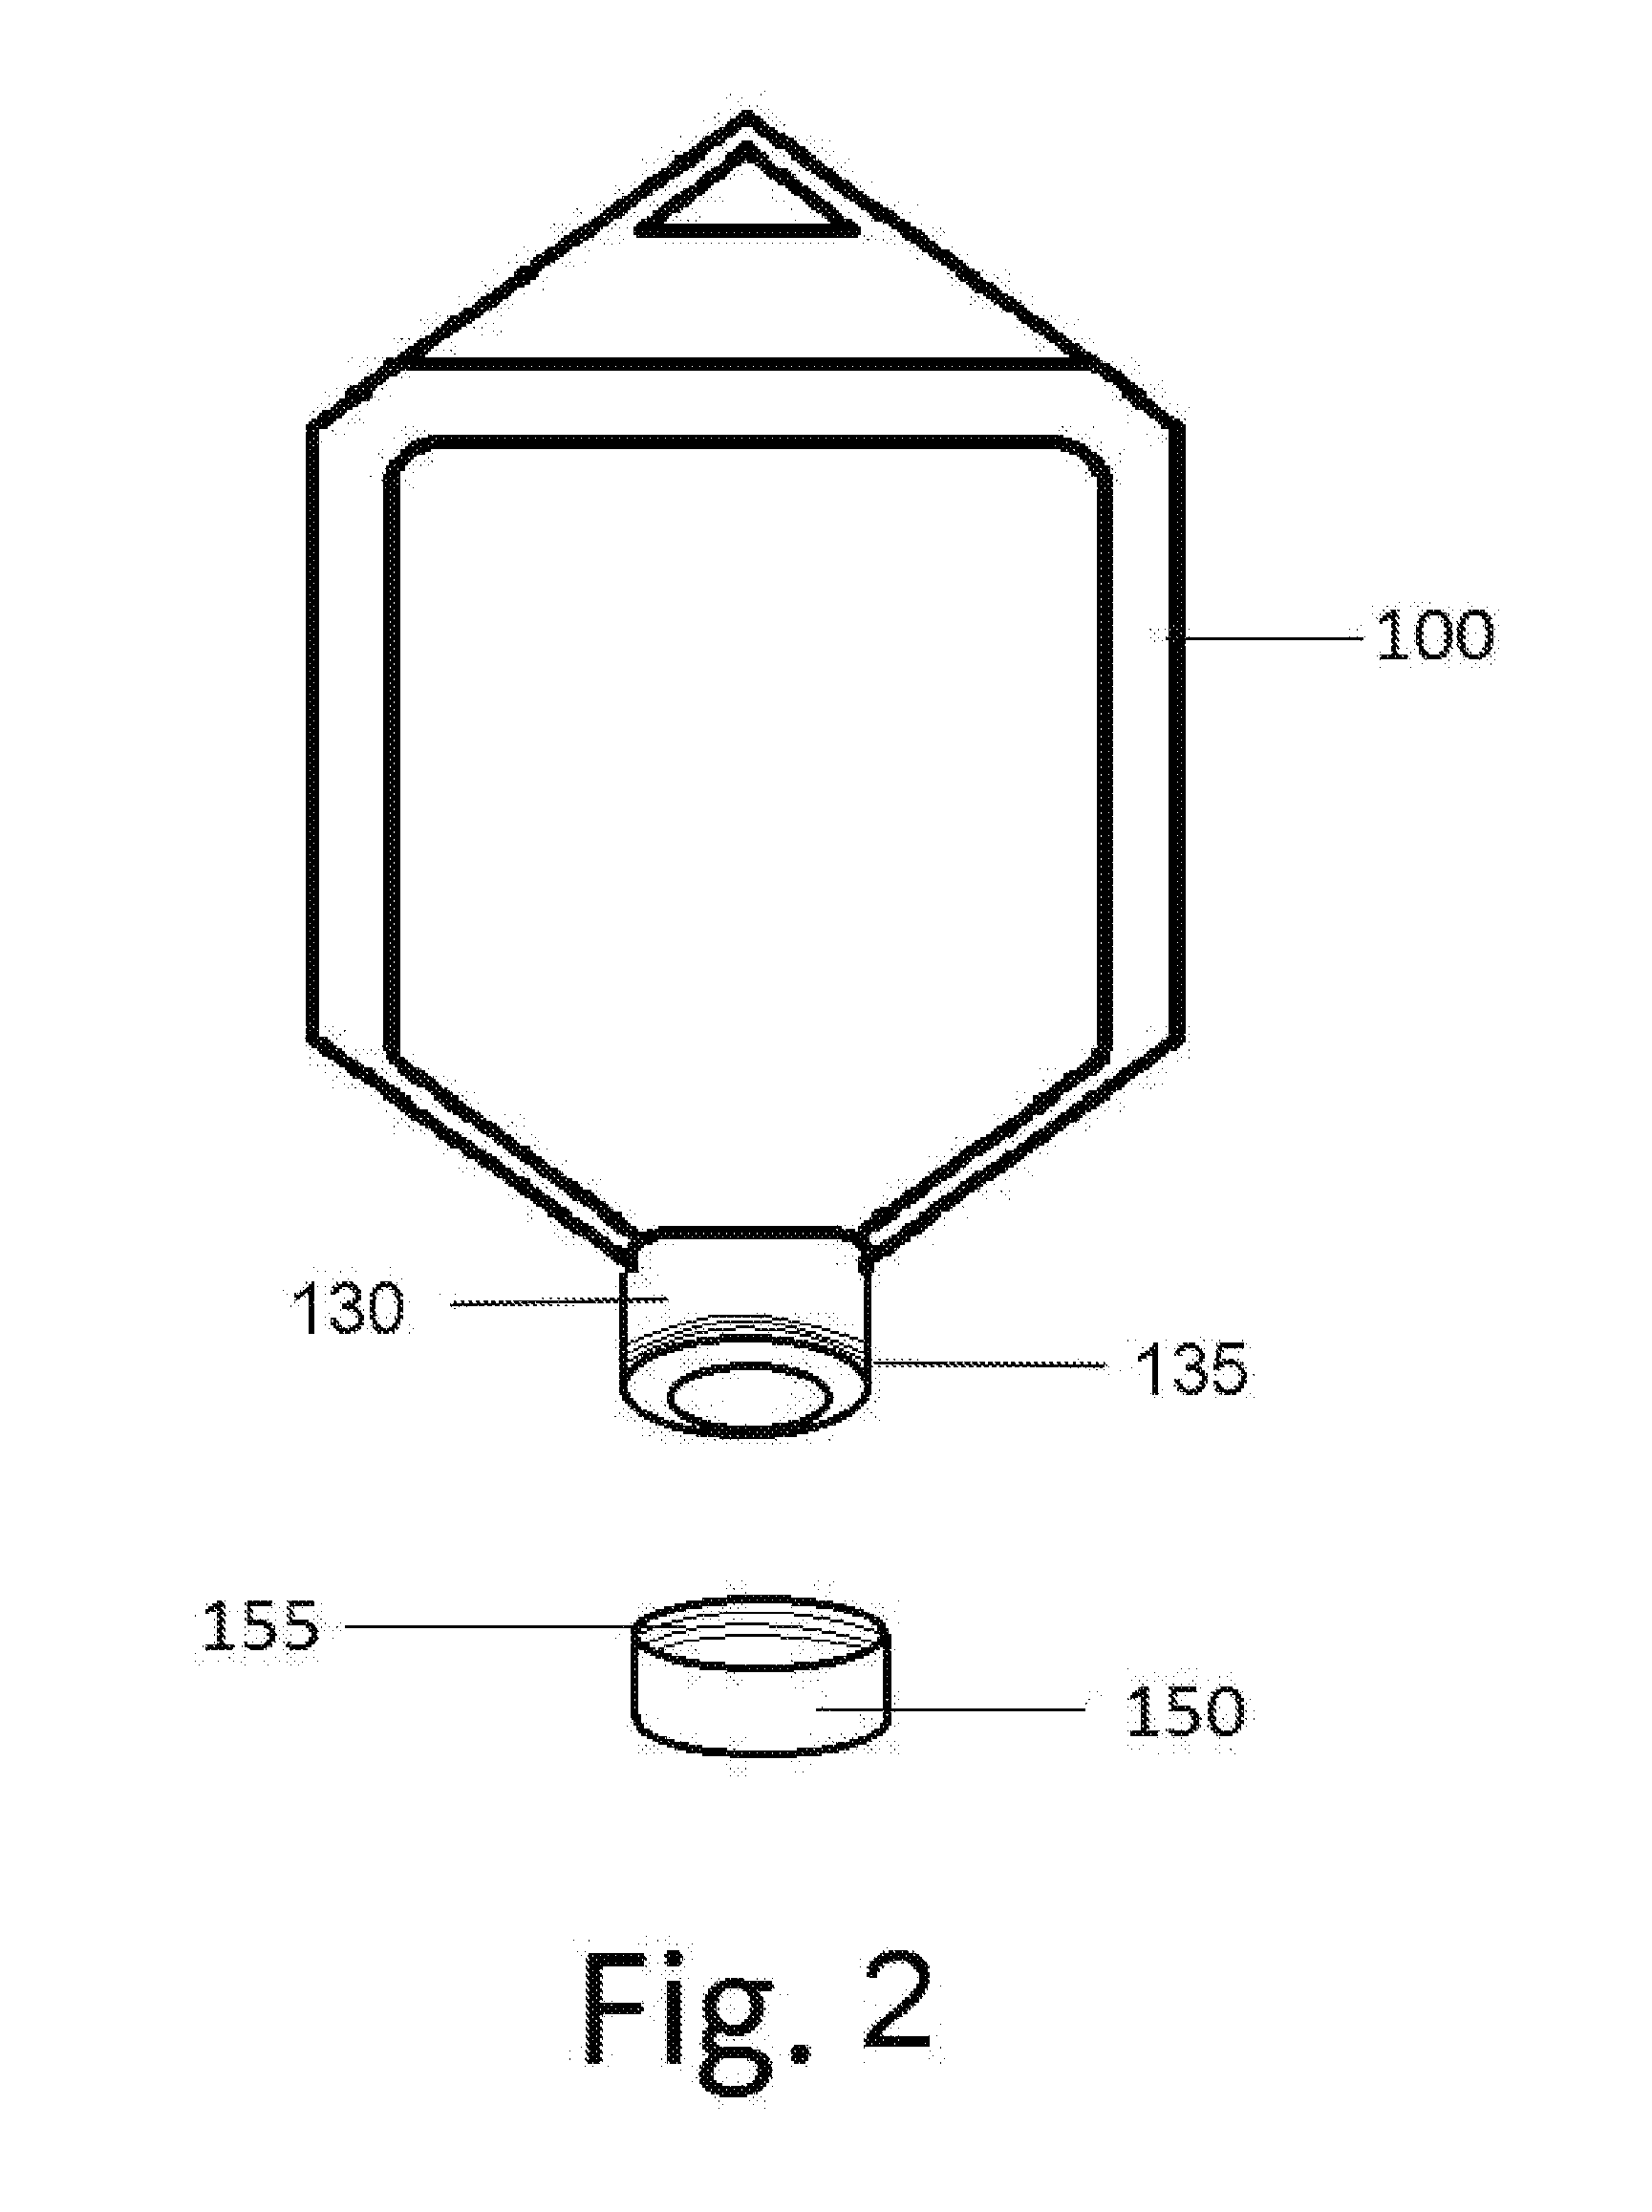 Method and system for producing and delivering airless medical ice slurry to induce hypothemia